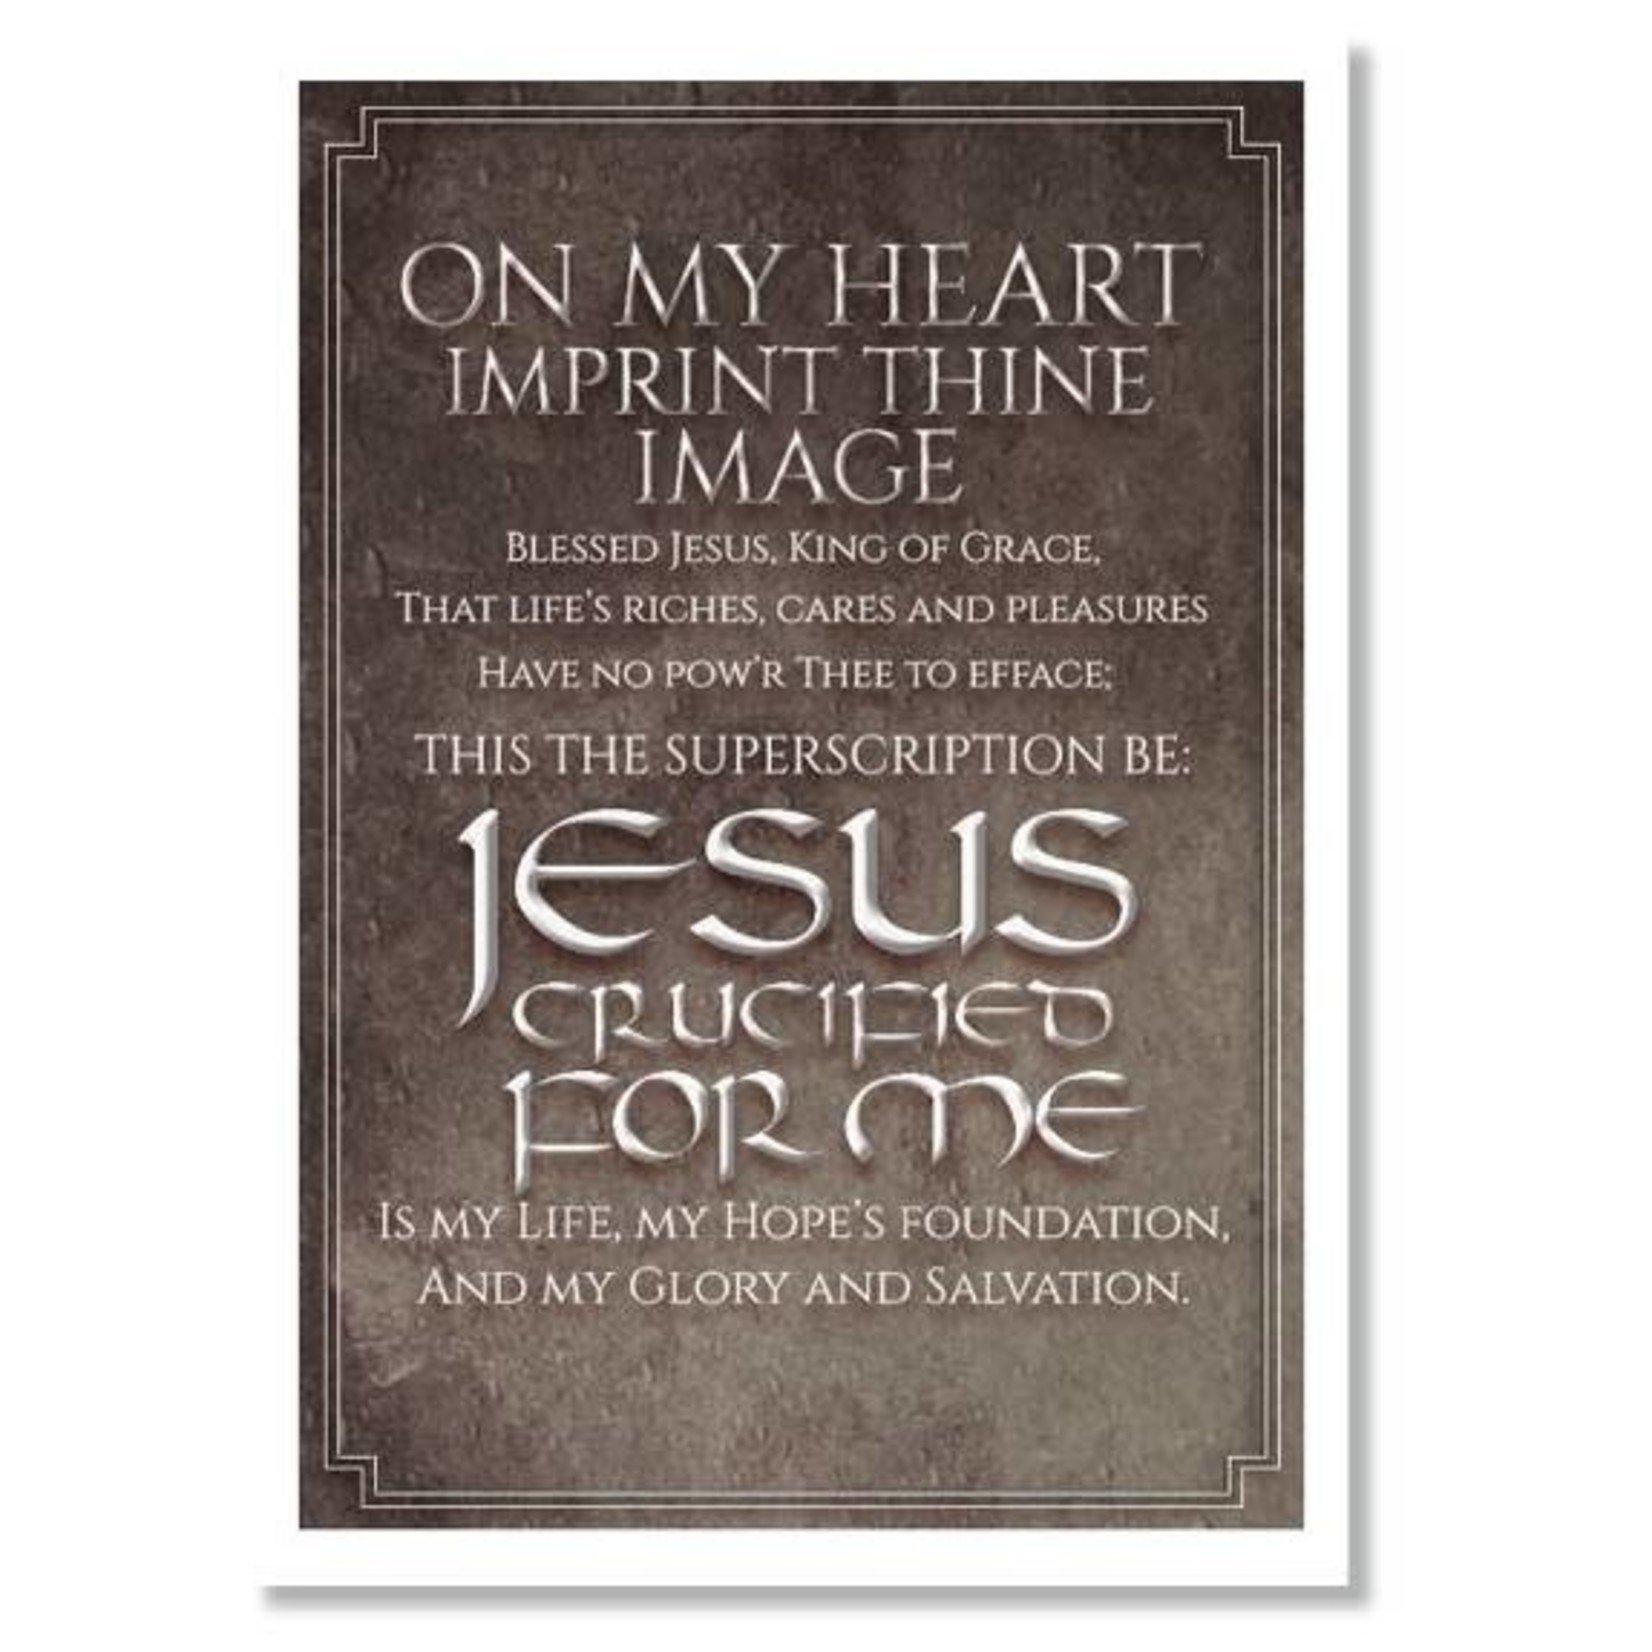 Hymns In My Heart - 5x7" Greeting Card - Installation (Pastor) - On My Heart Imprint Thine Image